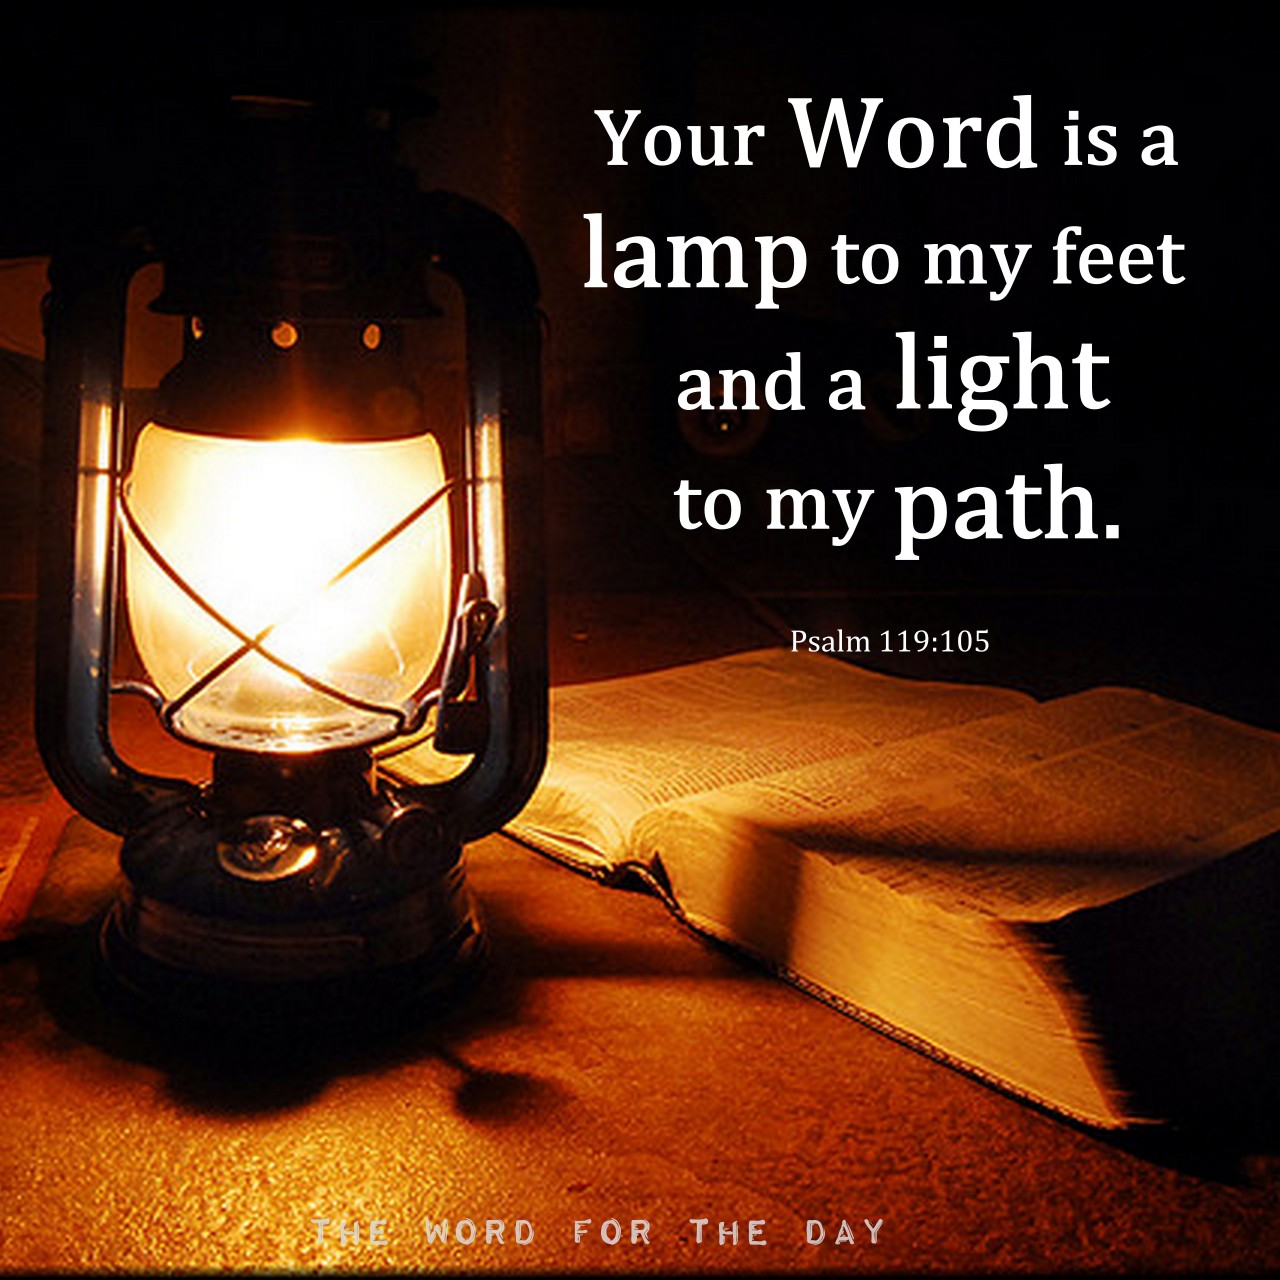 The Word For The Day • Psalm 119:105 likens the Word of God to a “lamp